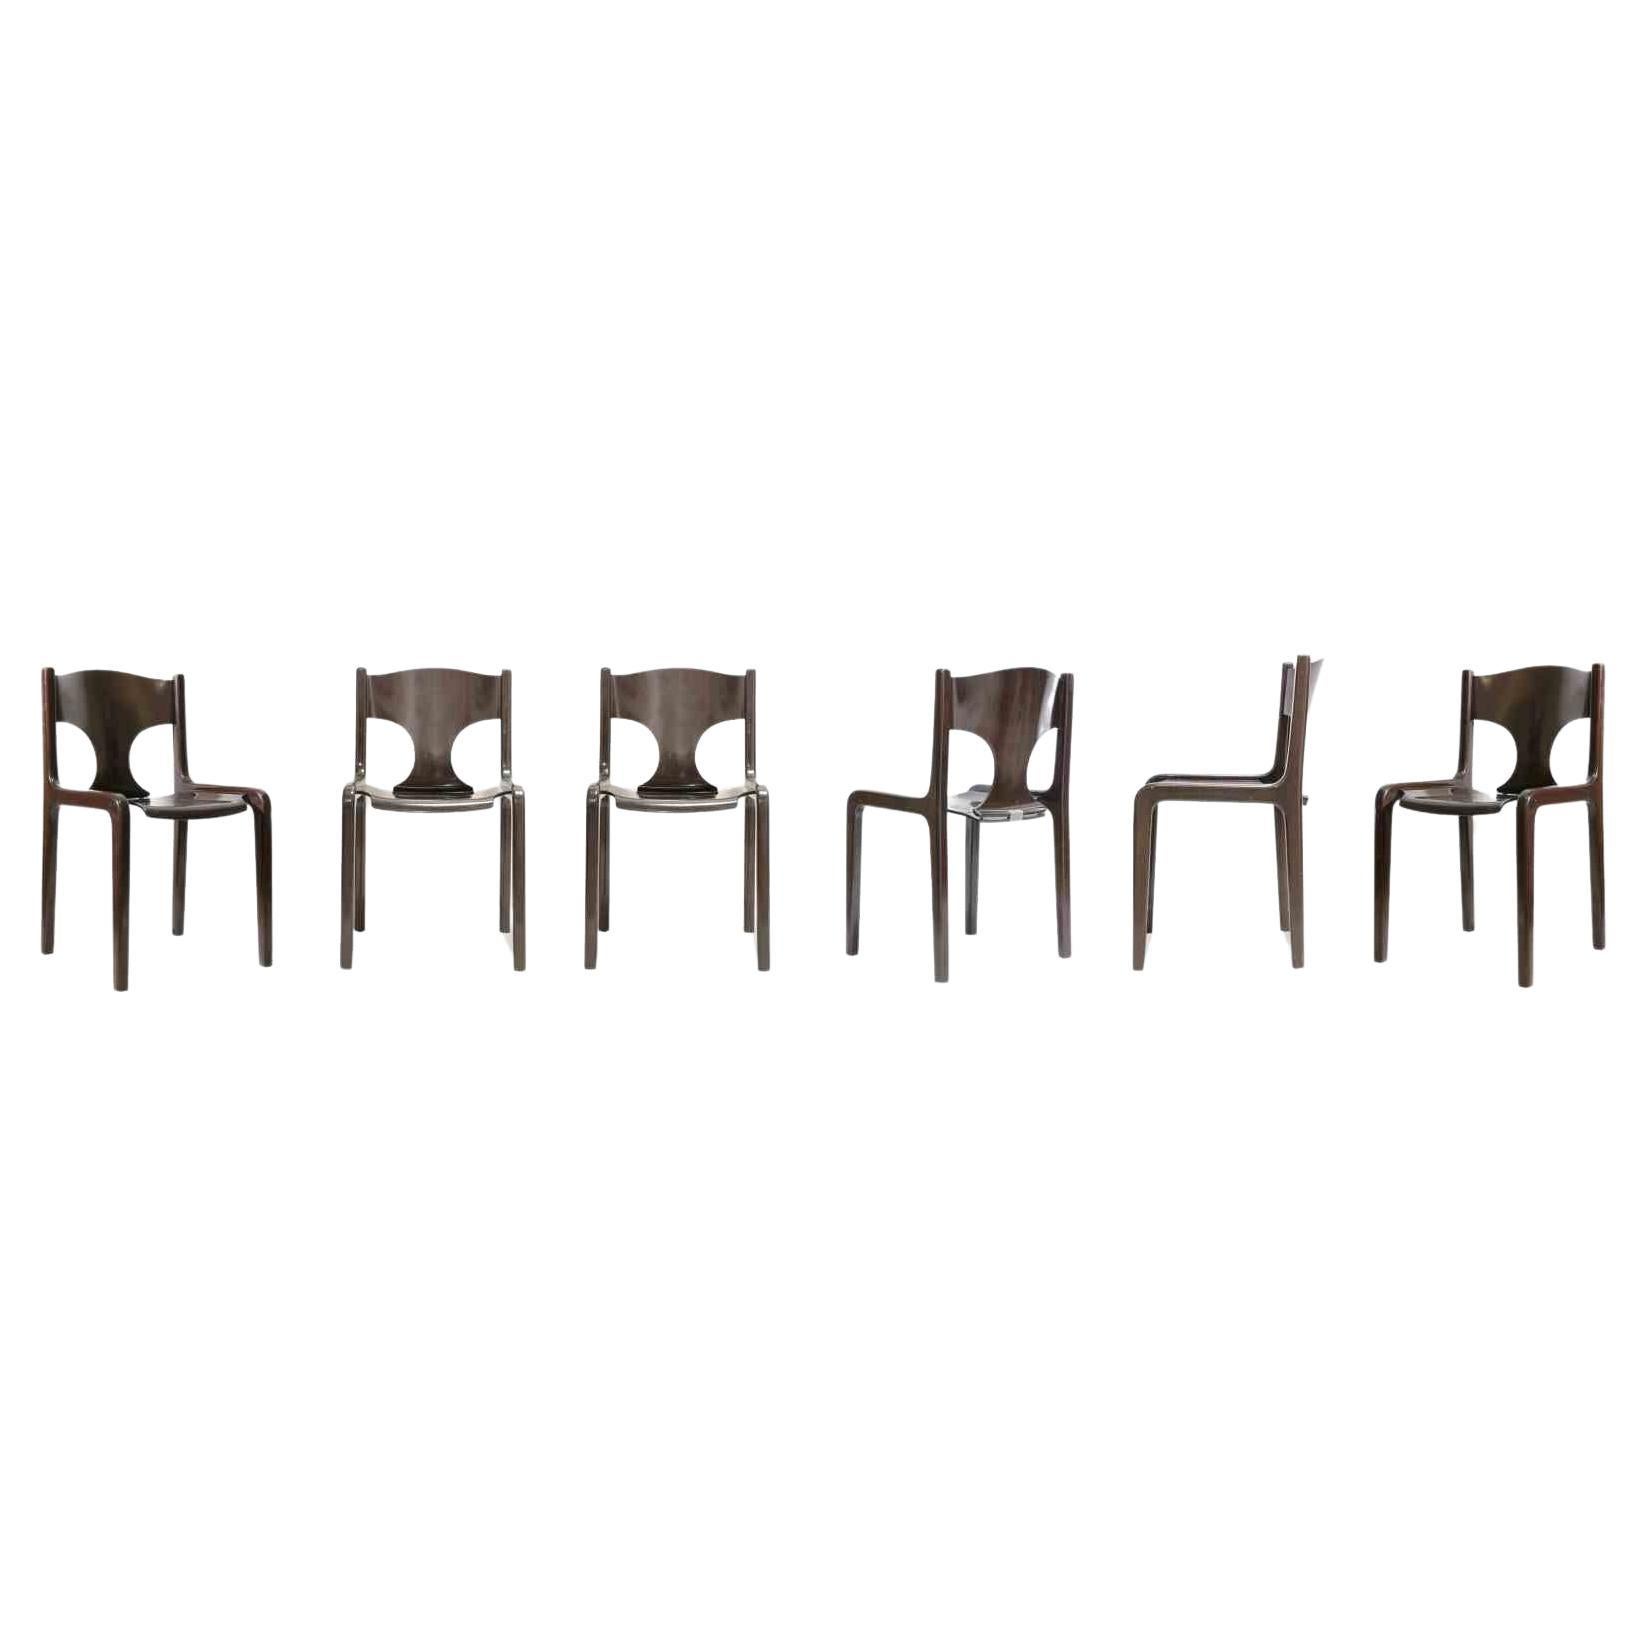 Set of 6 vintage chairs is an orginal design furniture item realized by Augusto Bozzi in the 1970s.

The set is composed by six chairs in wood with brass details.

Augusto Bozzi (1924–1982) was an Italian furniture designer famous for designing